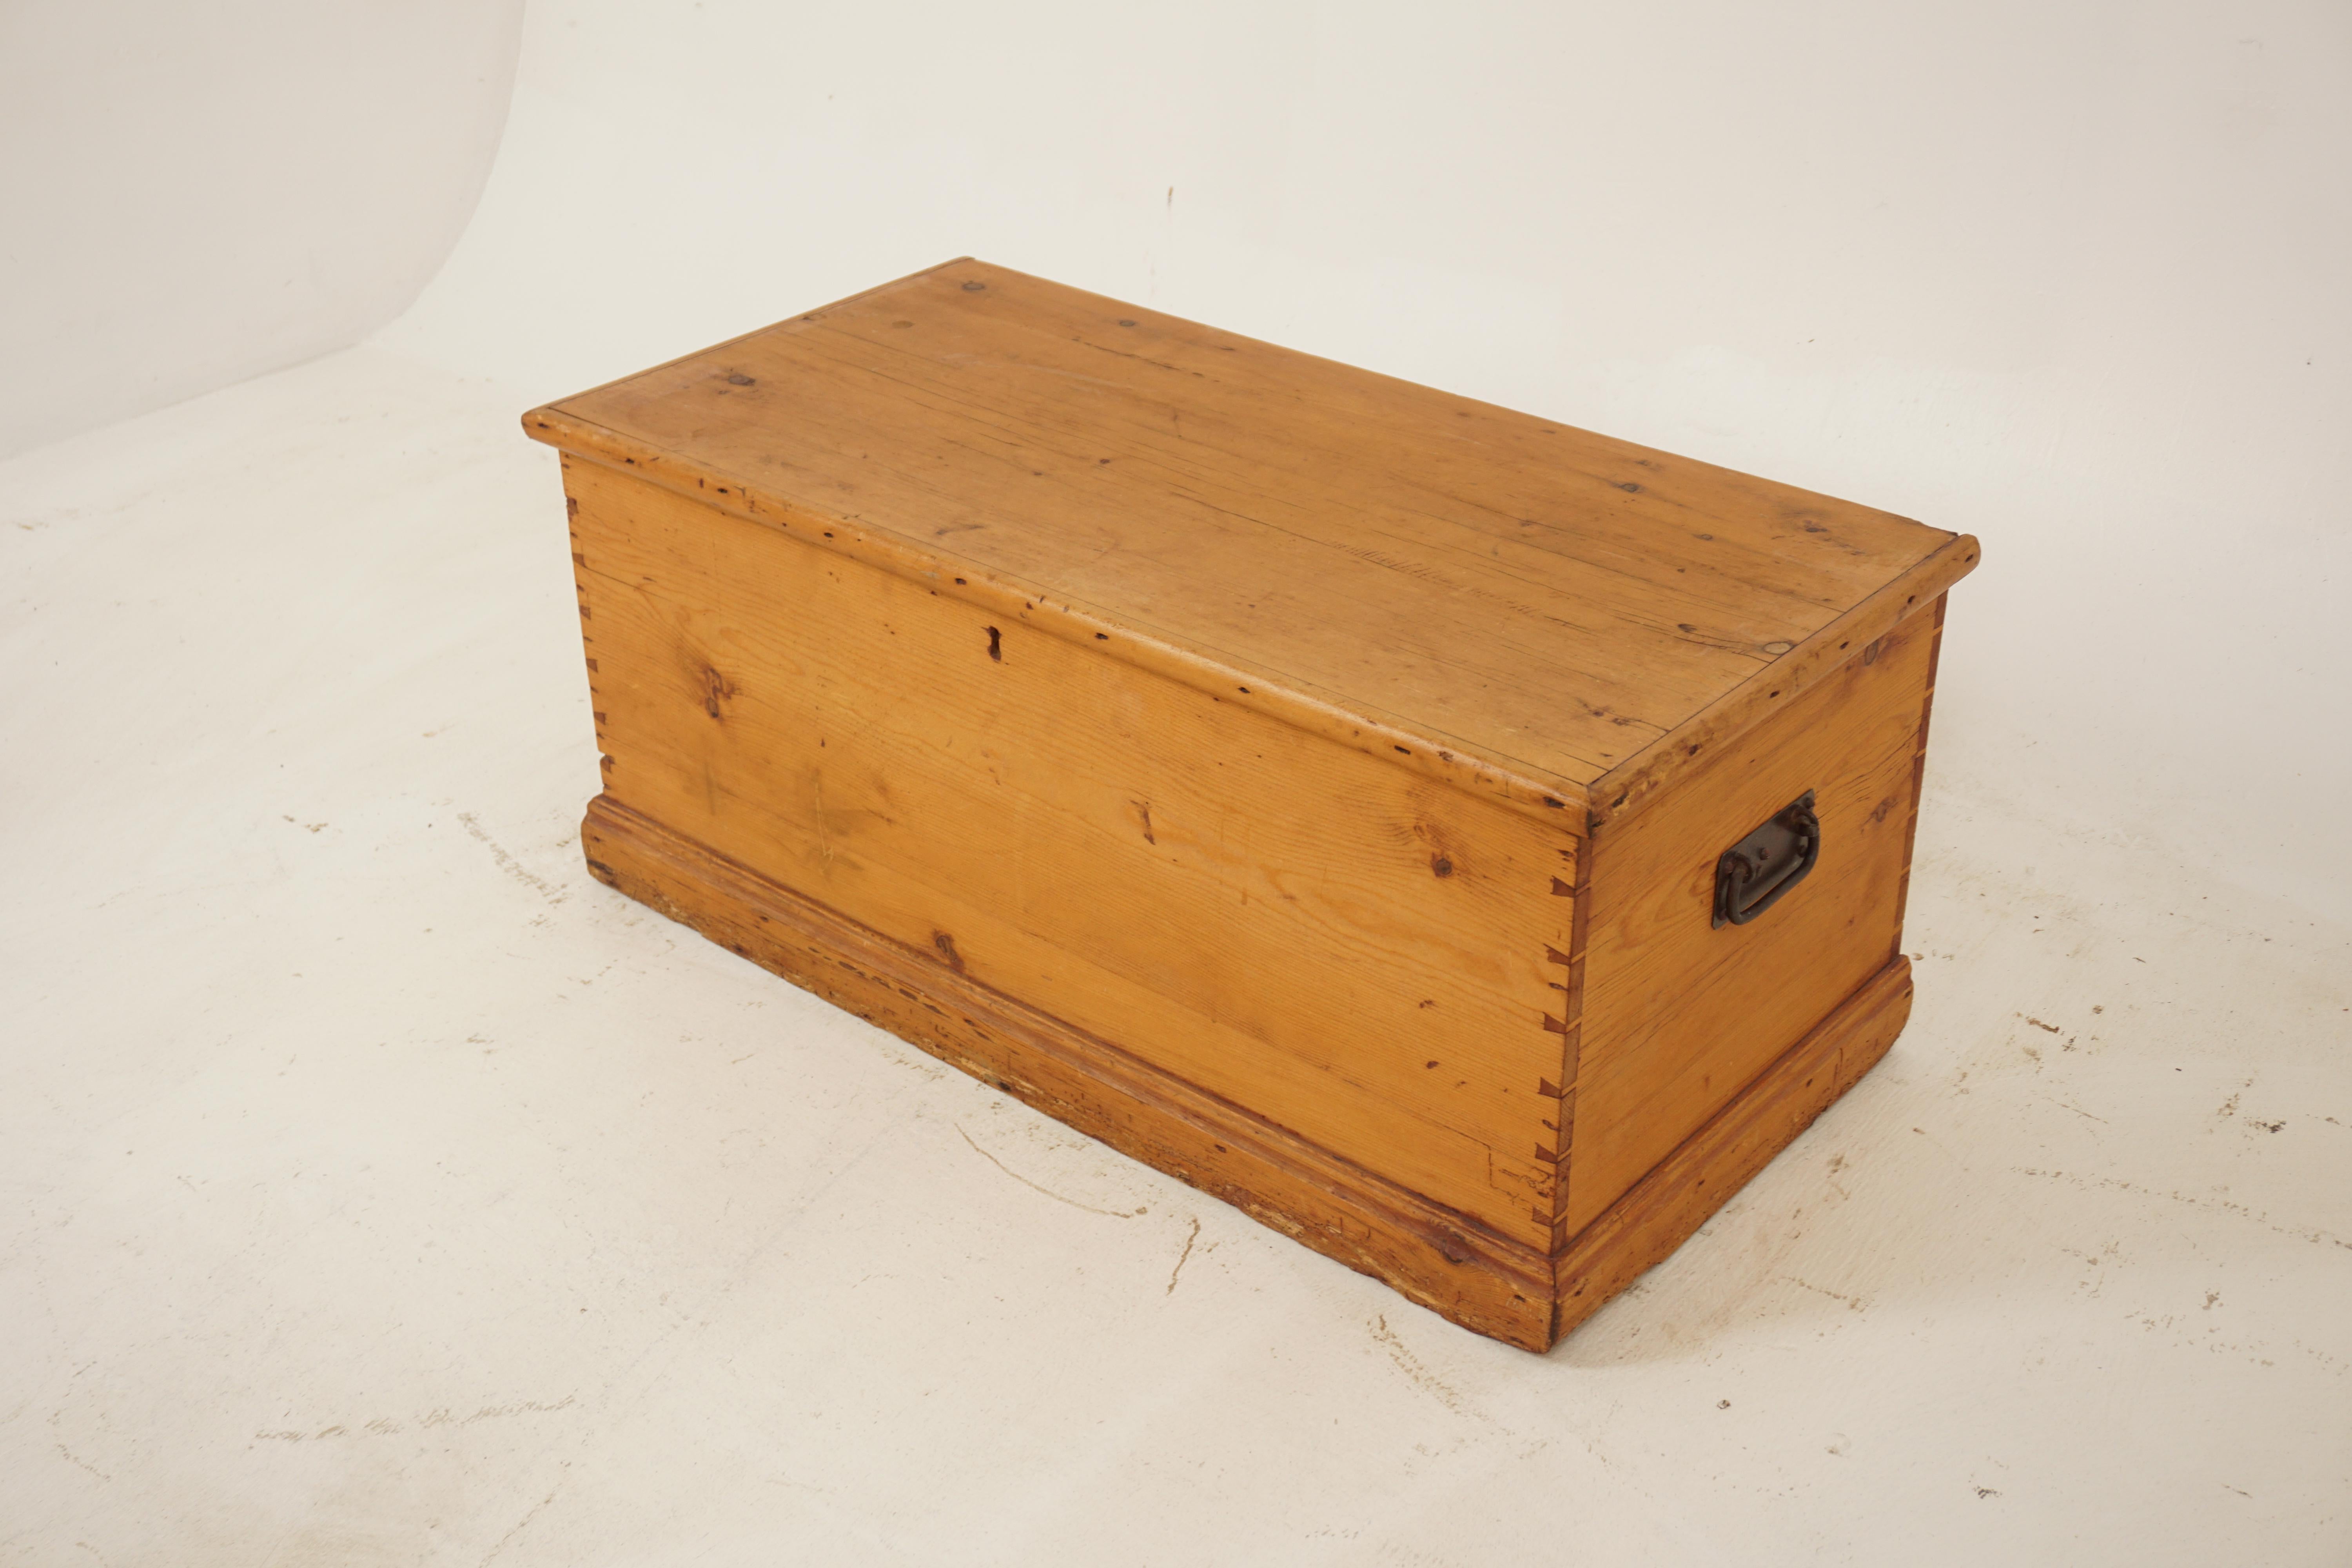 Antique Victorian Pine Blanket Box, Coffee Table, Scotland 1880, B2872

Scotland 1880
Solid Pine
Original Finish
Rectangular moulded top
Dovetailed construction on all corners
Lid lifts up to reveal open storage space
Original blacksmith